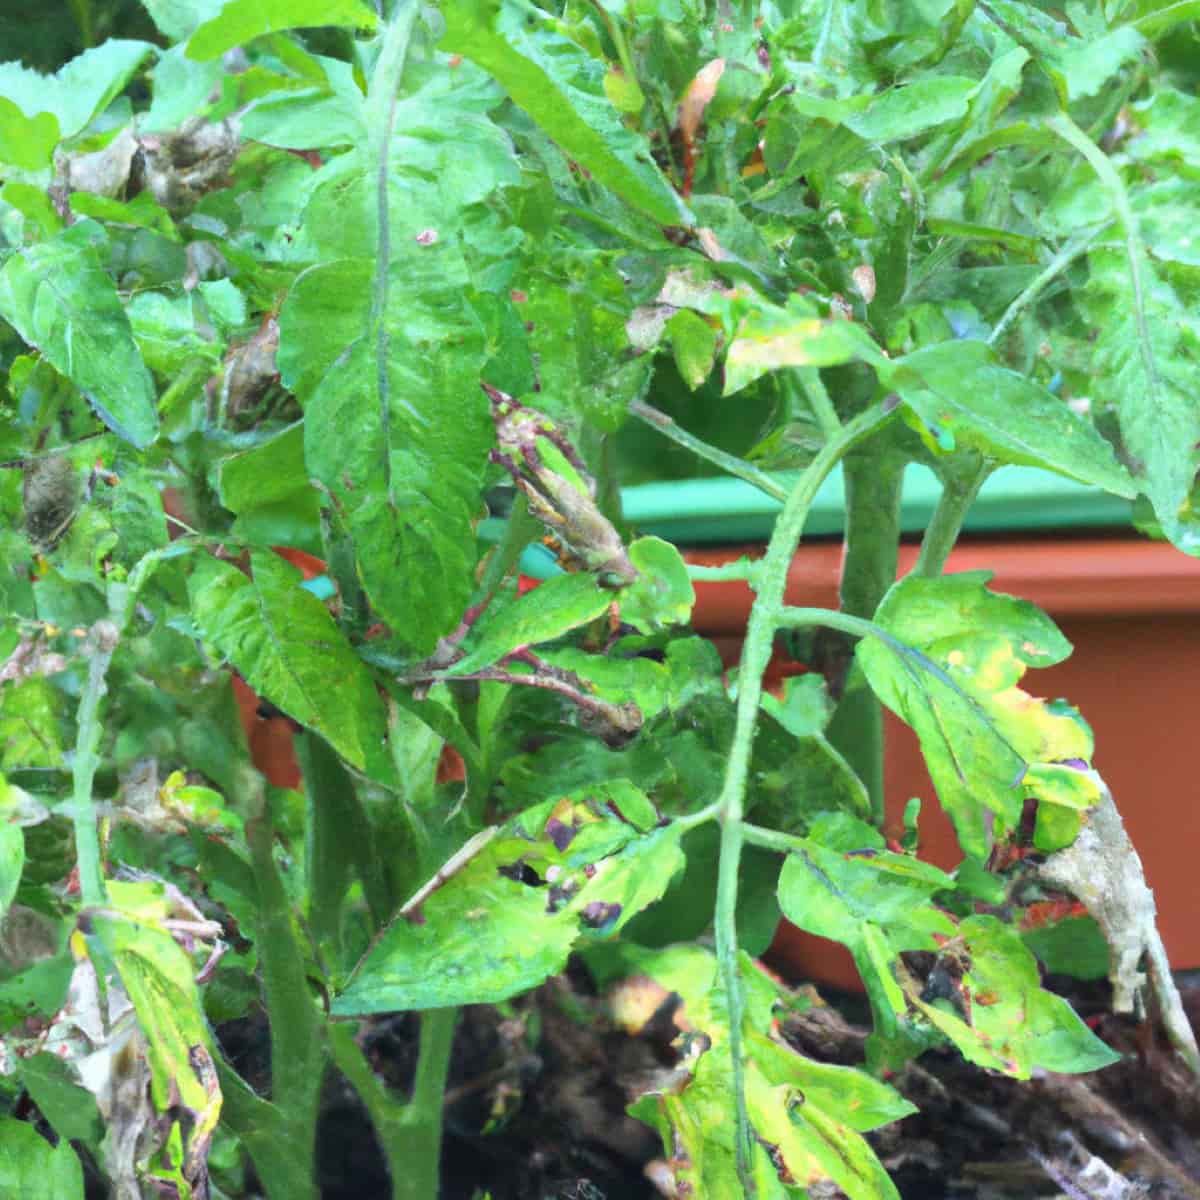  Early Blight in Tomato Crops